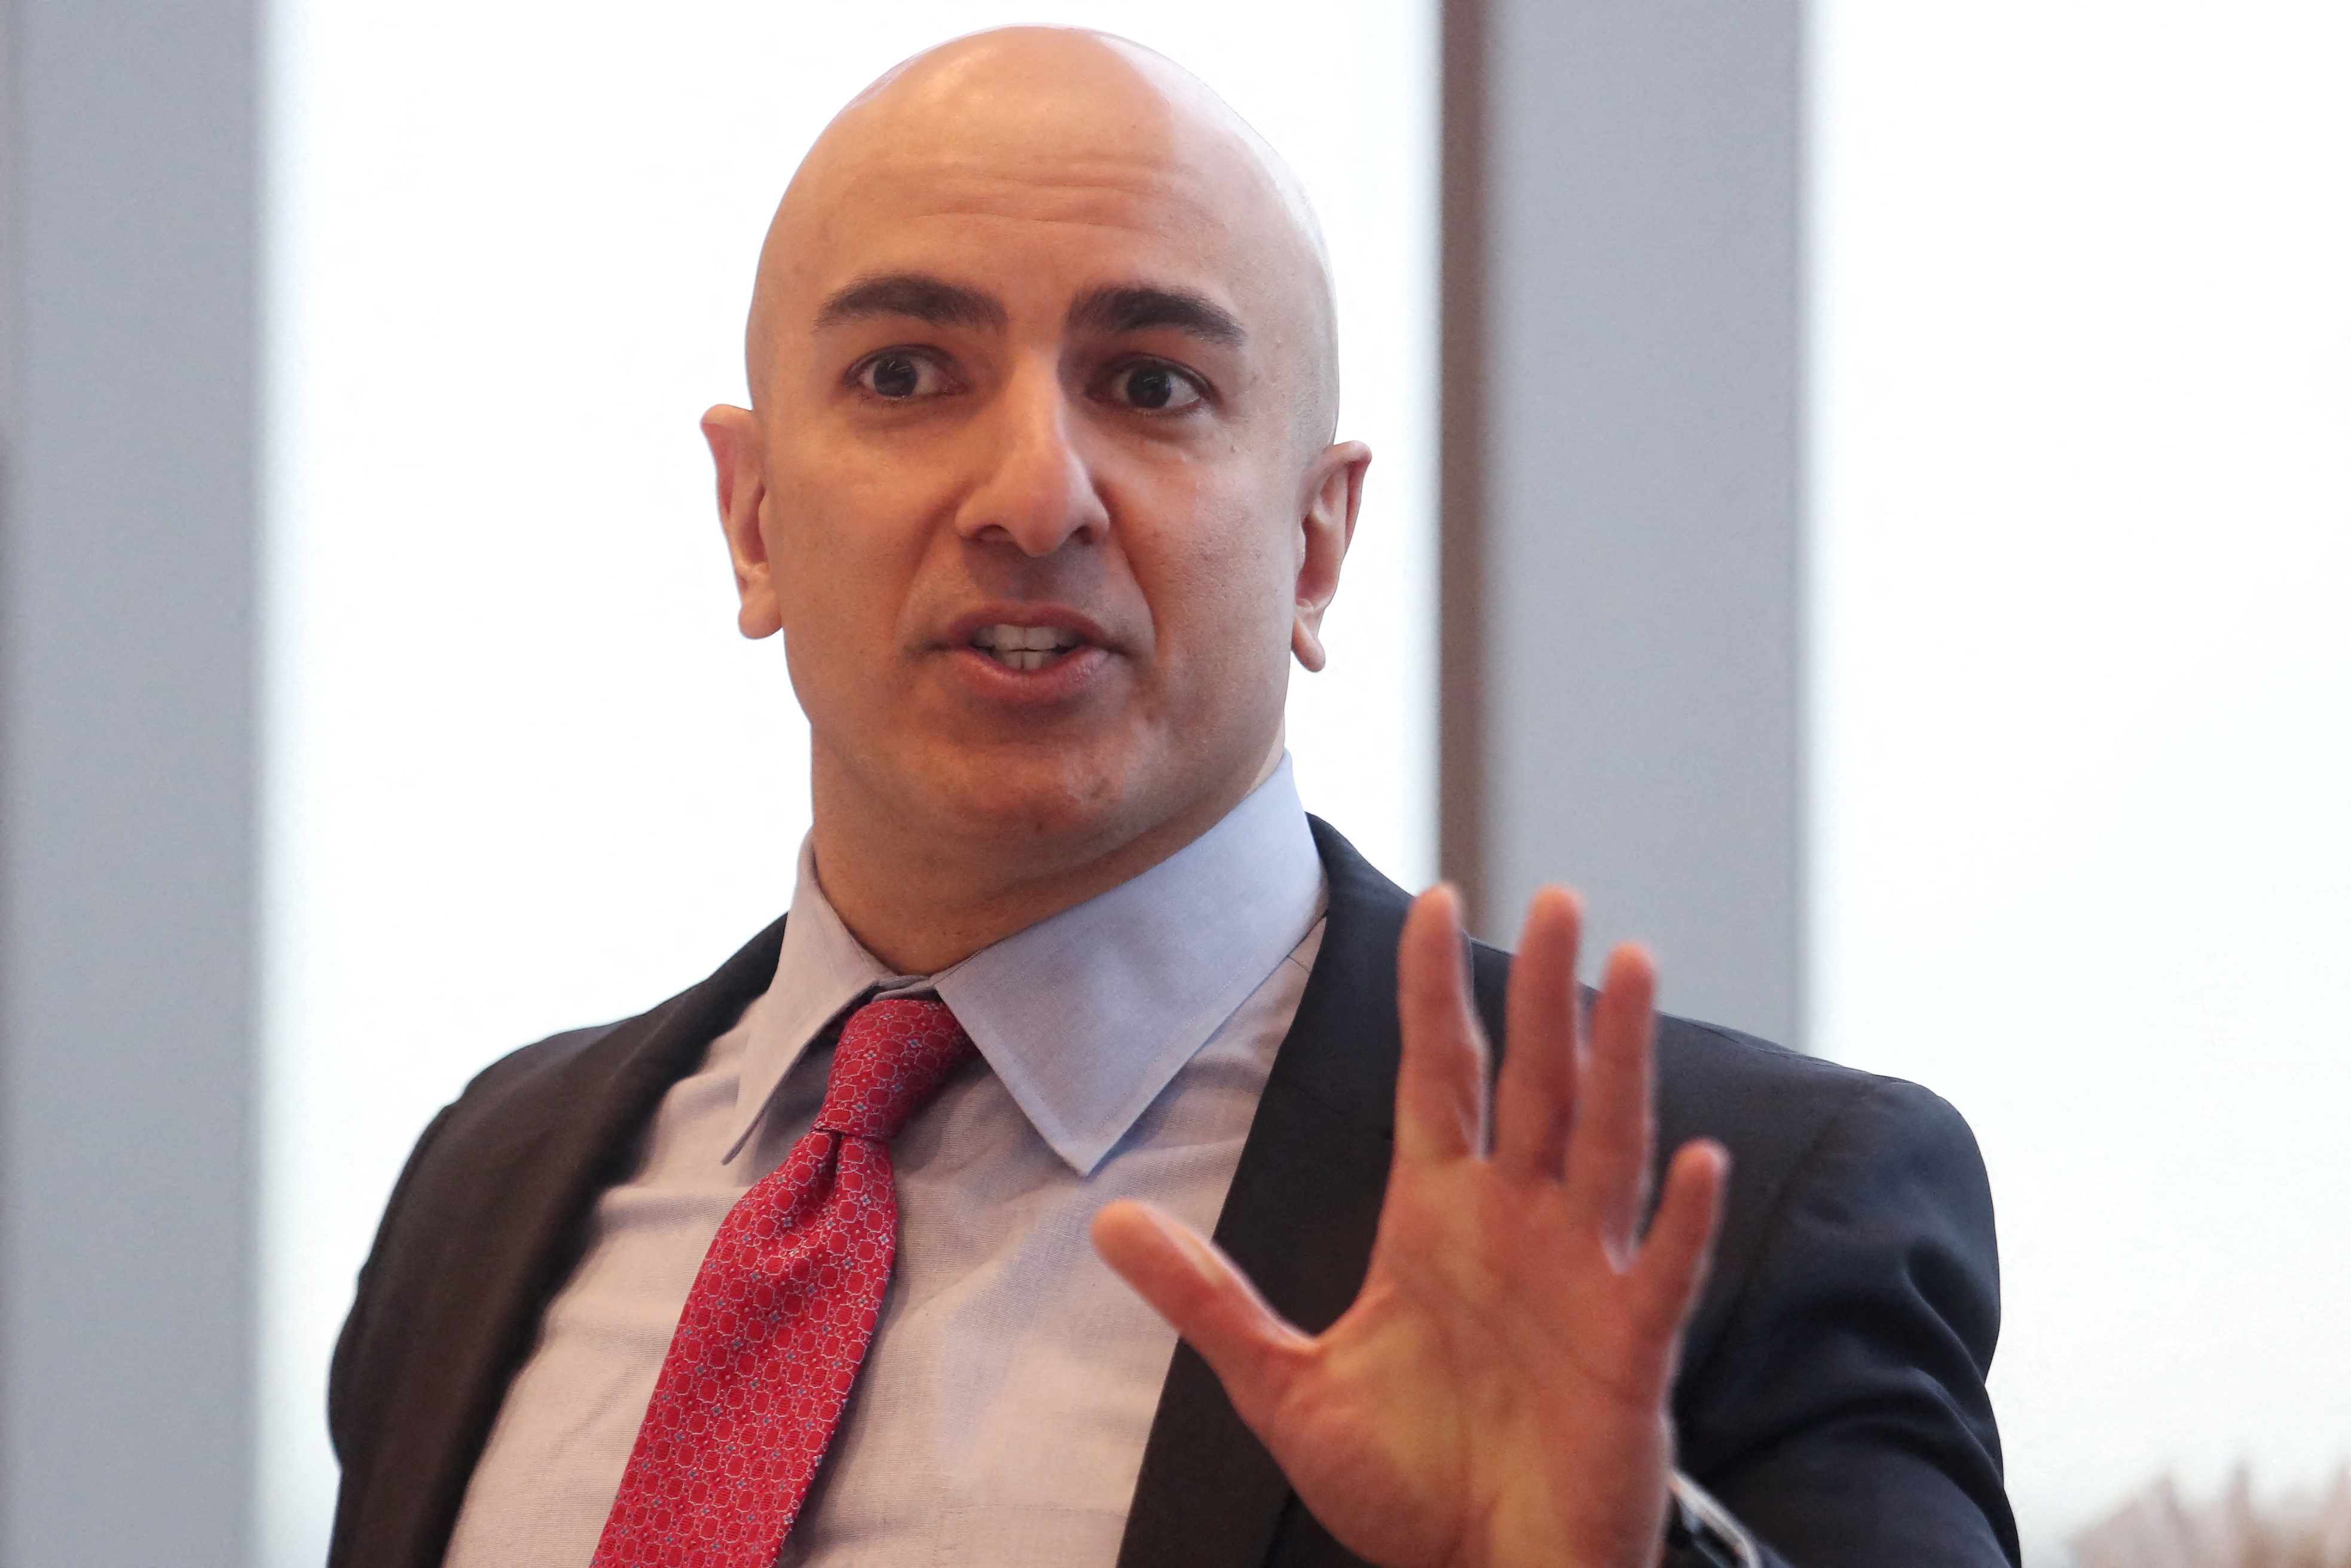 President of the Federal Reserve Bank of Minneapolis Neel Kashkari speaks during an interview in New York